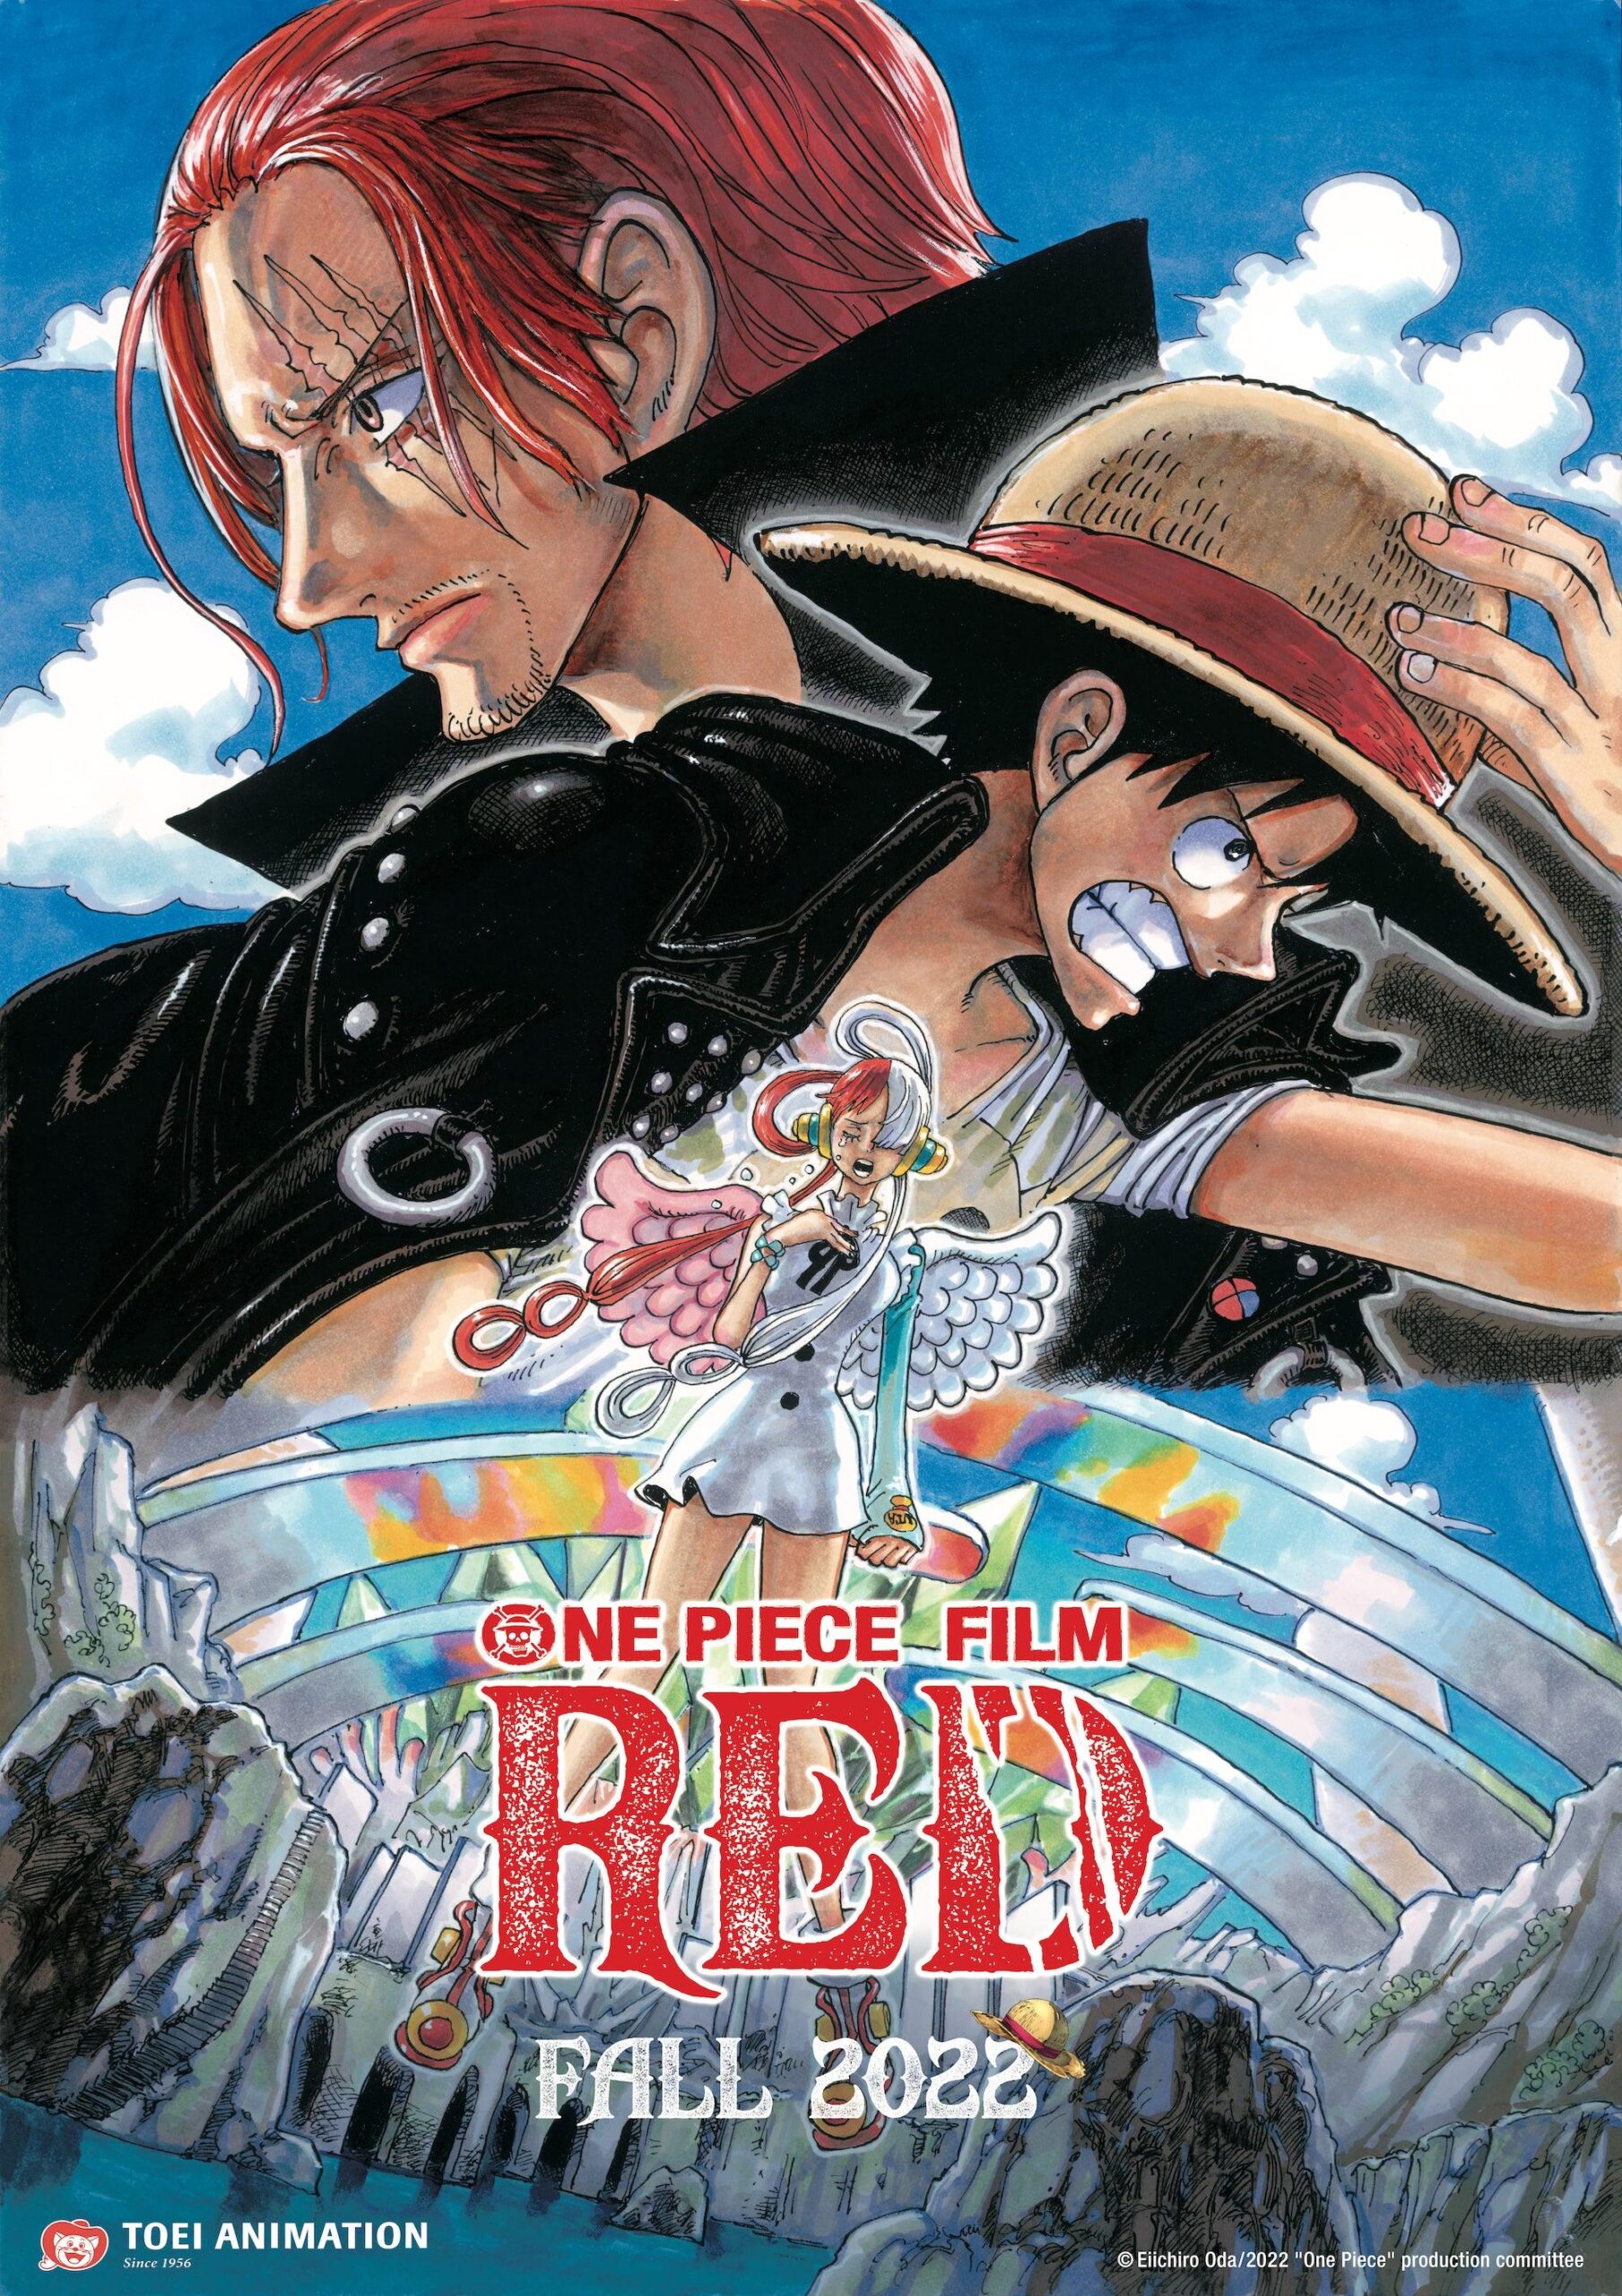 One Piece Red Film Best Wallpaper Hd, One Piece Red Film, Anime